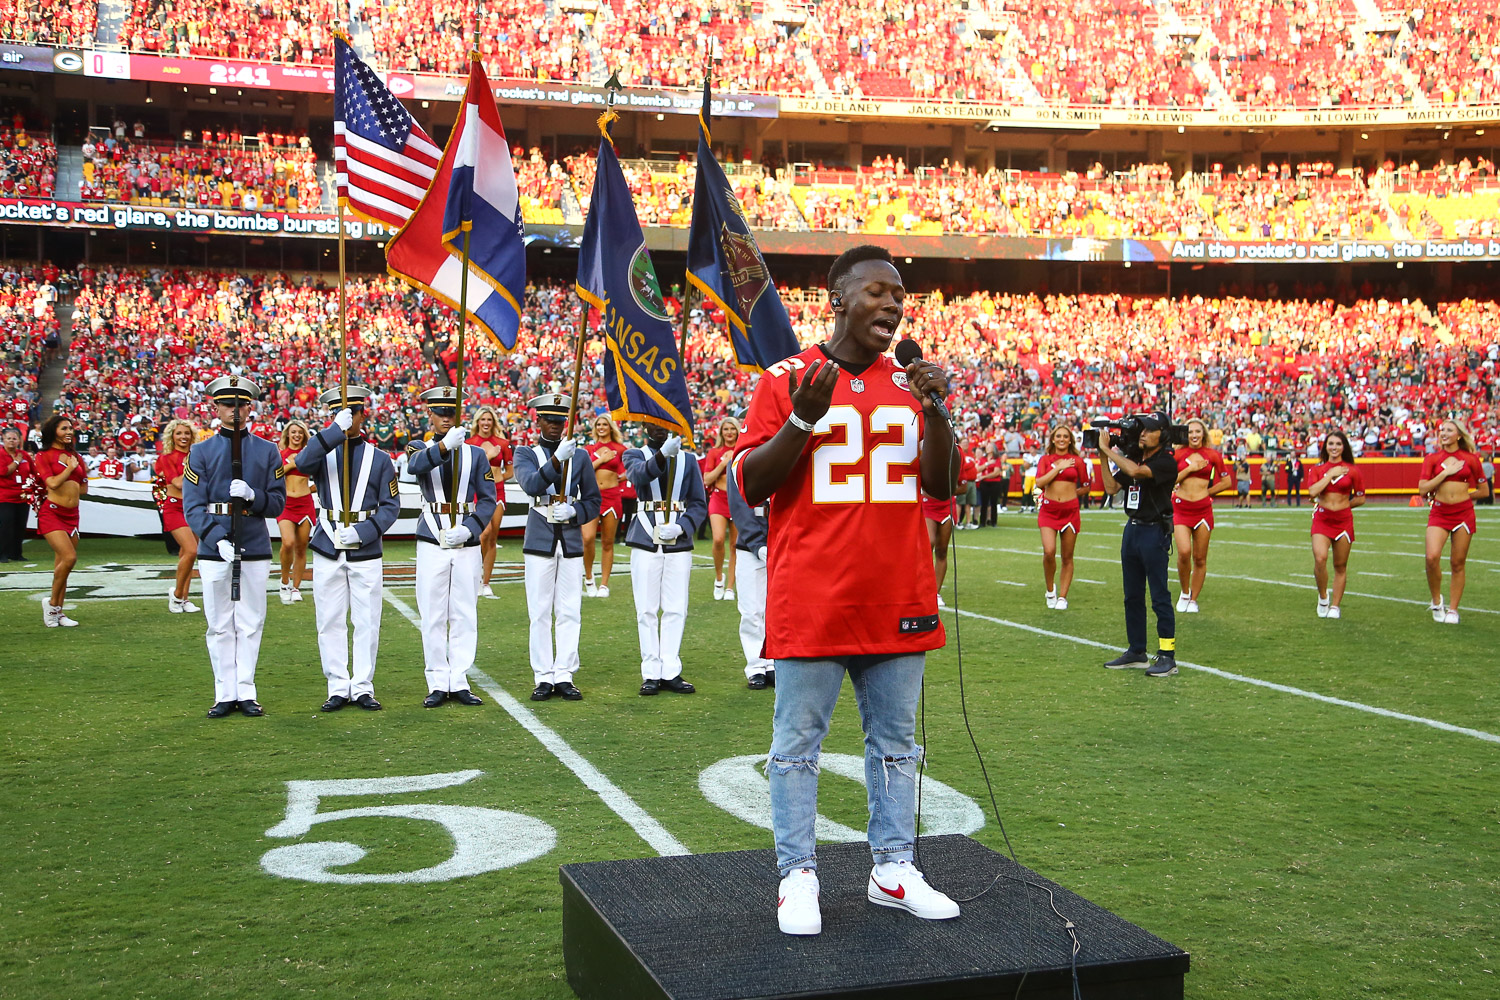 Nashville recording artist Brian Nhira singing the National Anthem prior to an NFL preseason football game against the Green Bay Packers, Thursday, August 25, 2022 in Kansas City.